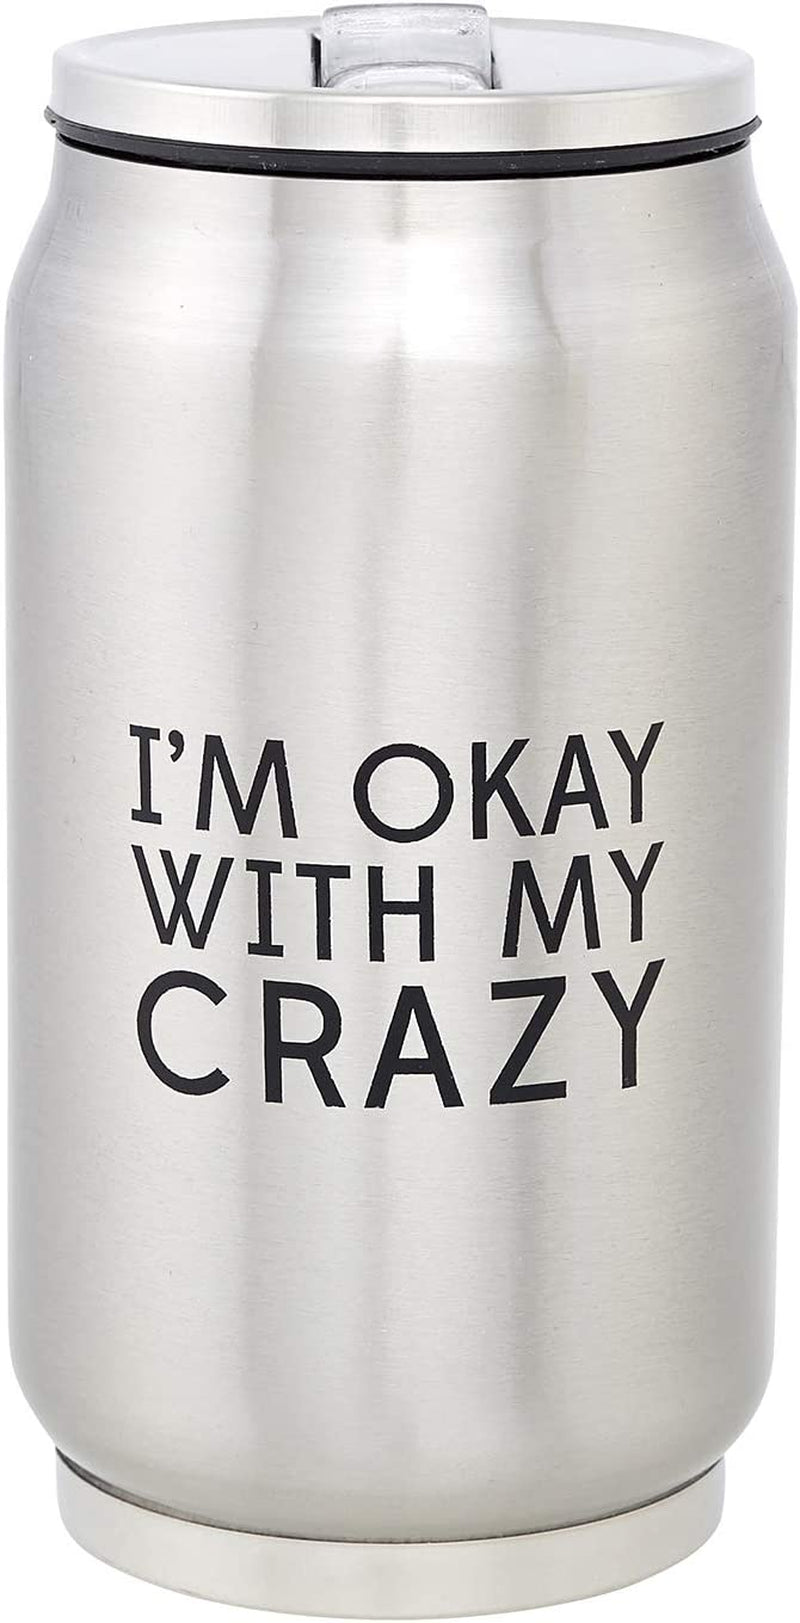 SB Design Studio SIPS Stainless-Steel Insulated Can (Tumbler) with Lid and Collapsible Straw, 10-Ounces, Running Late Home & Garden > Kitchen & Dining > Tableware > Drinkware Santa Barbara Design Studio Crazy 10-Ounce 